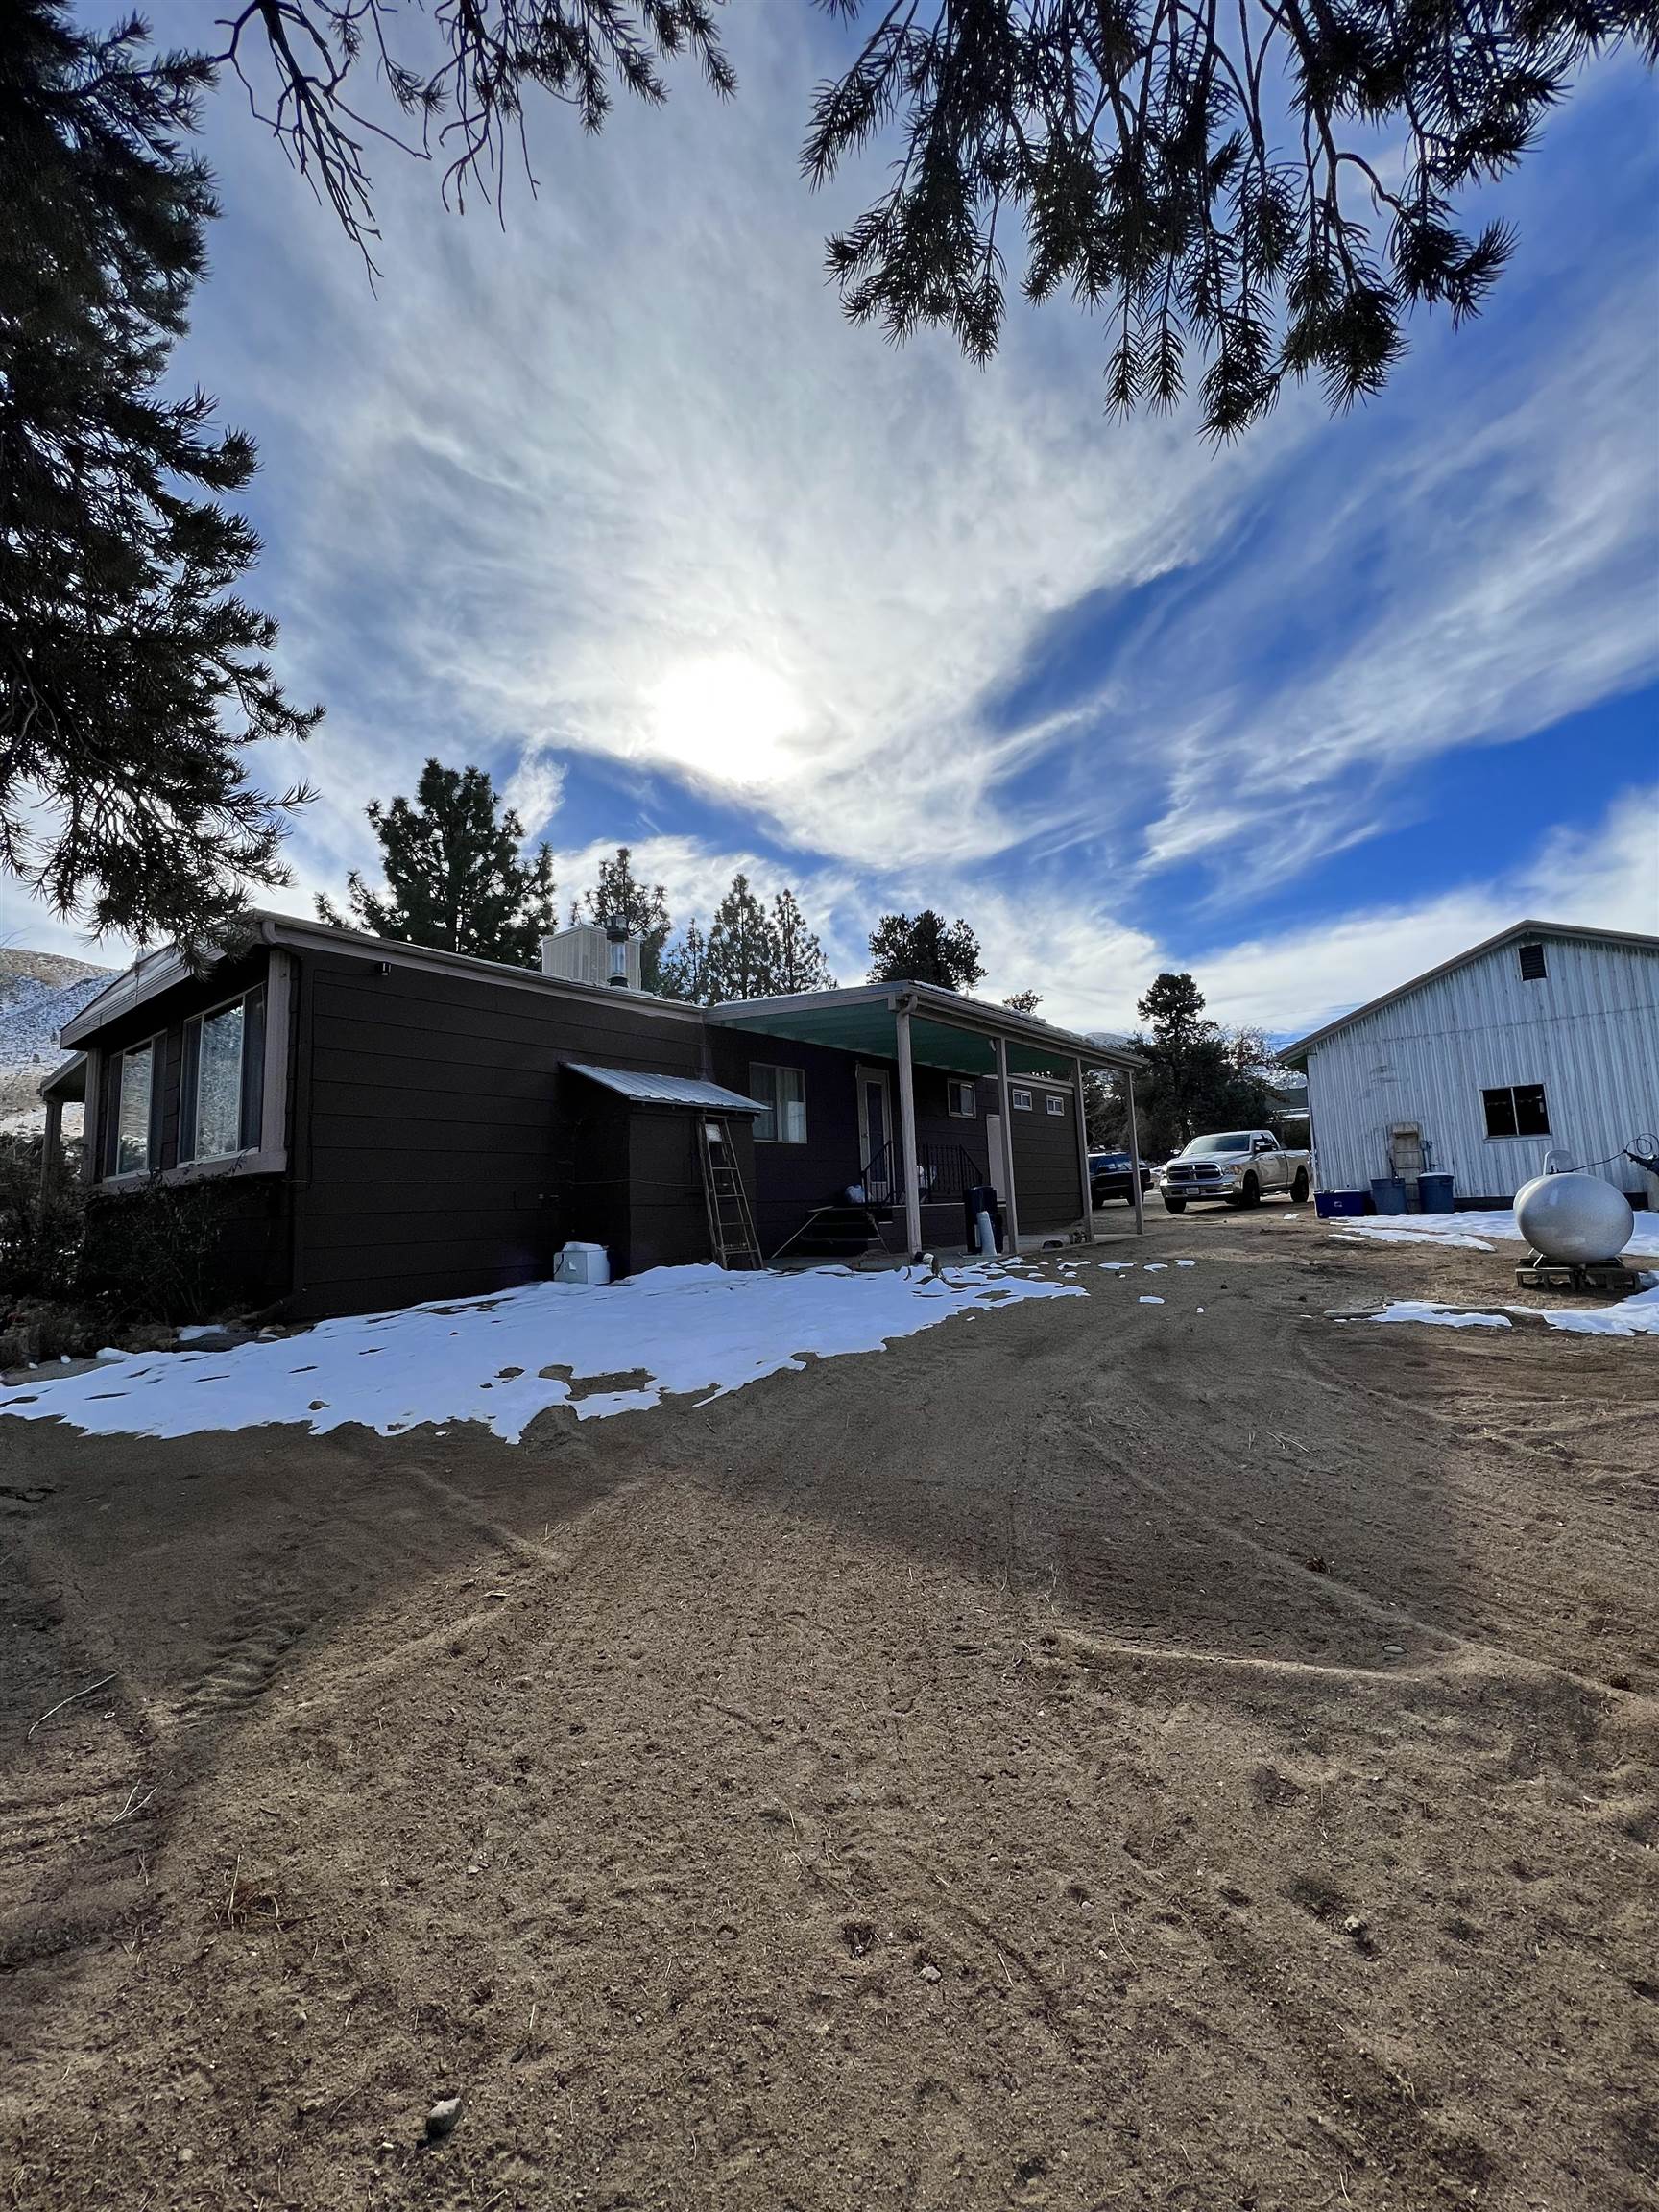 Walker Mini-Ranch on 2 acres. This home has everything you need for country living. Main home is 2 bedroom/2 bath. Oversized Detached Garage and Workshop. Two 1 acre parcels are adjacent and being sold as one.